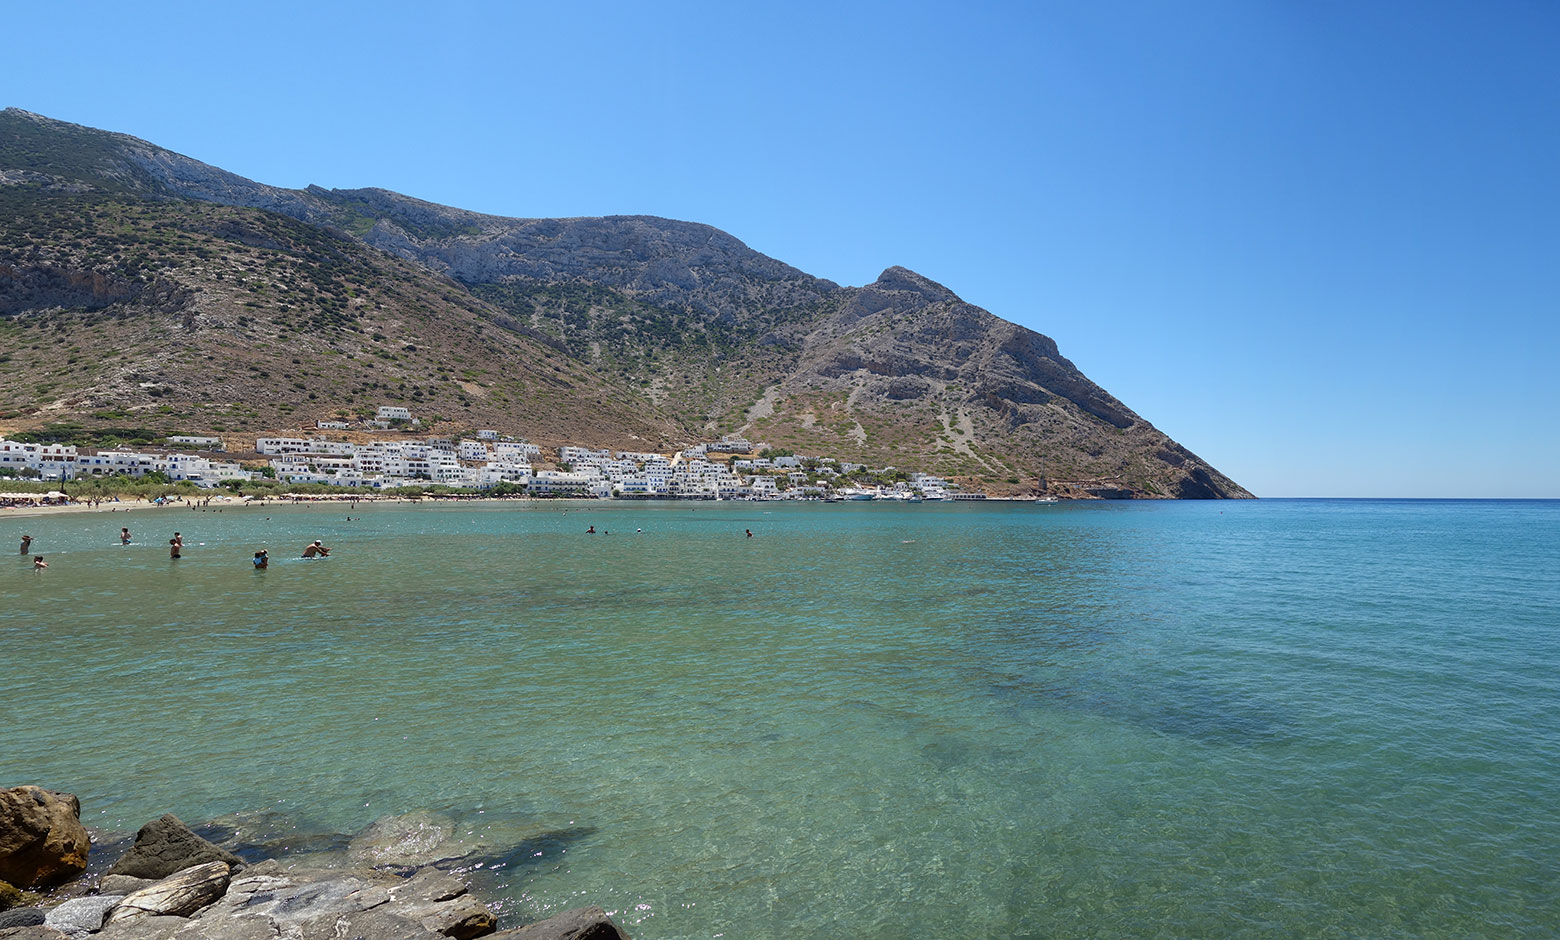 Stay at Seaside accommodation in Sifnos